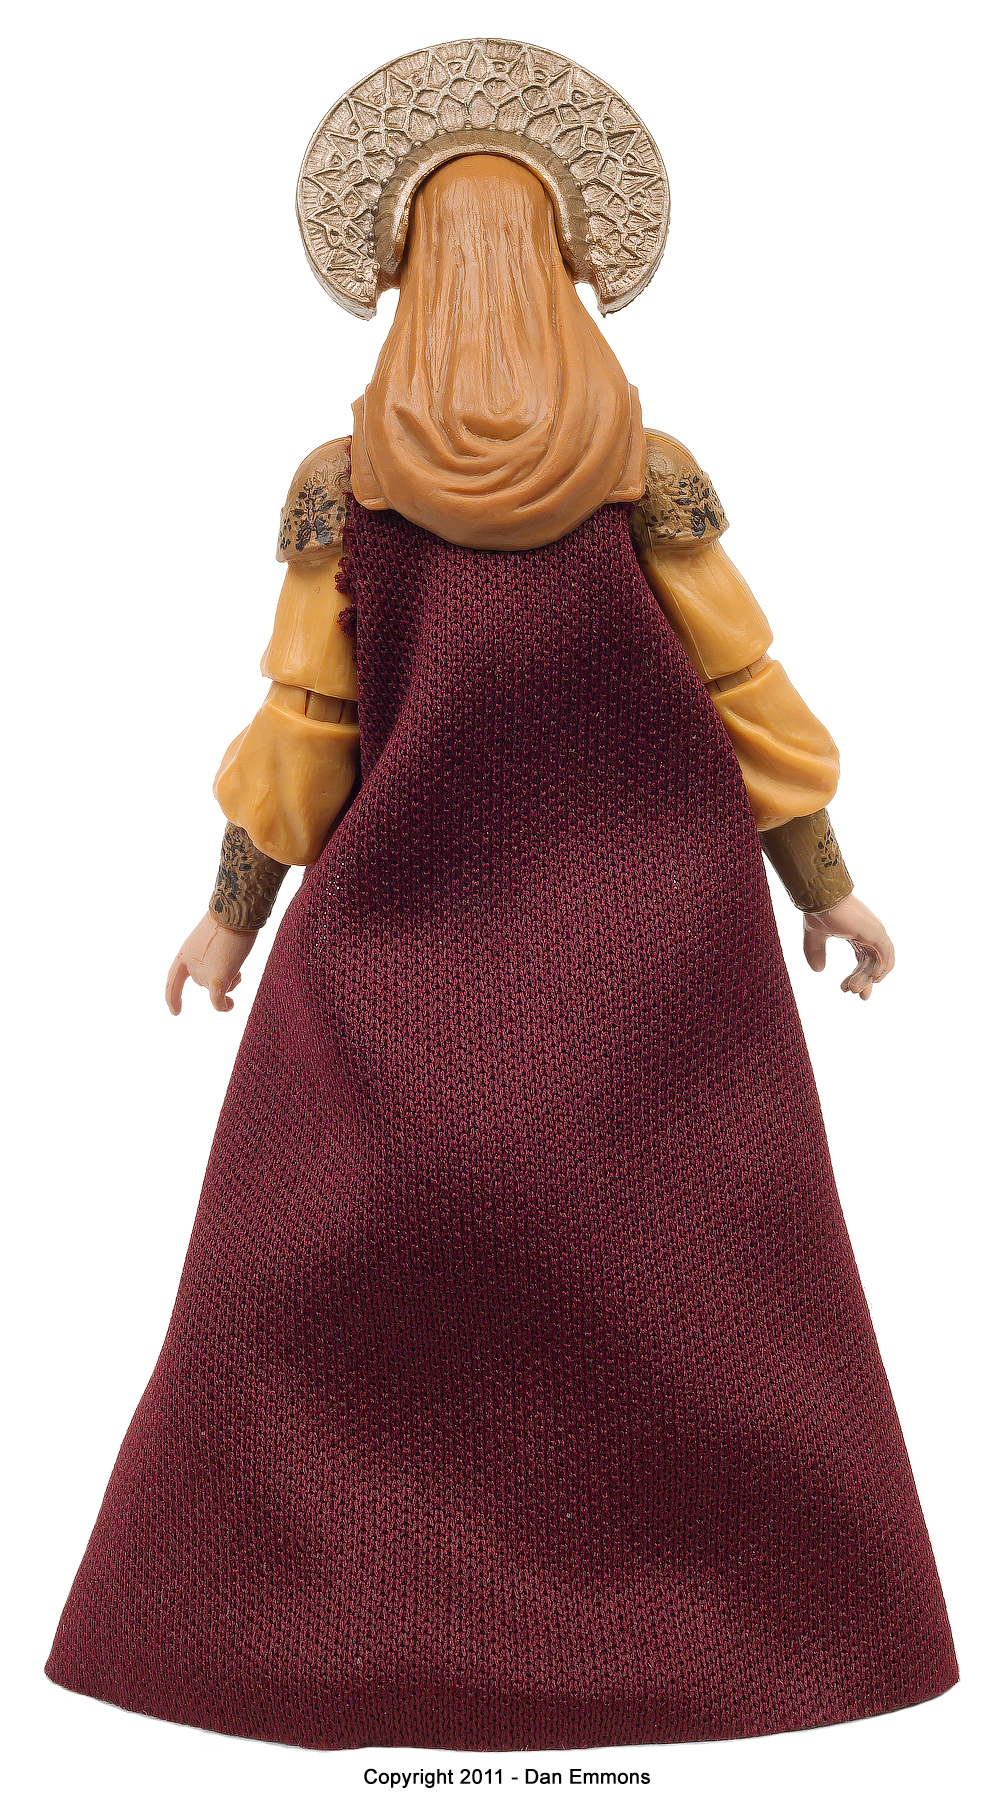 The Vintage Collection - VC33: Padme Amidala